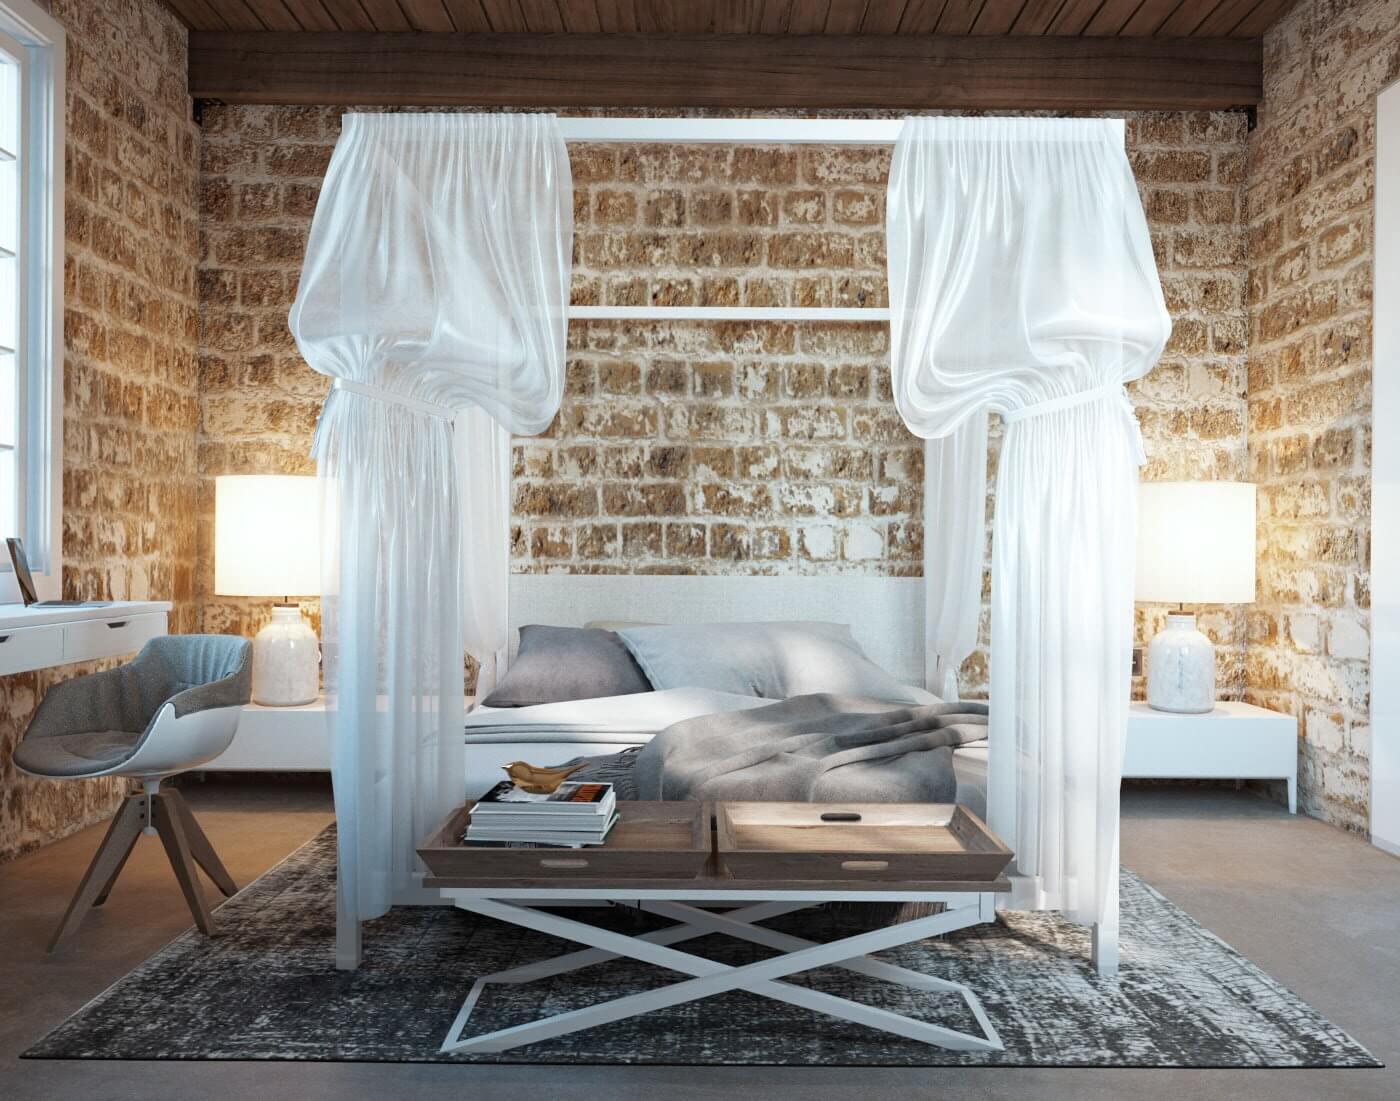 The Villa in Italy guest bedroom bed - cgi visualization